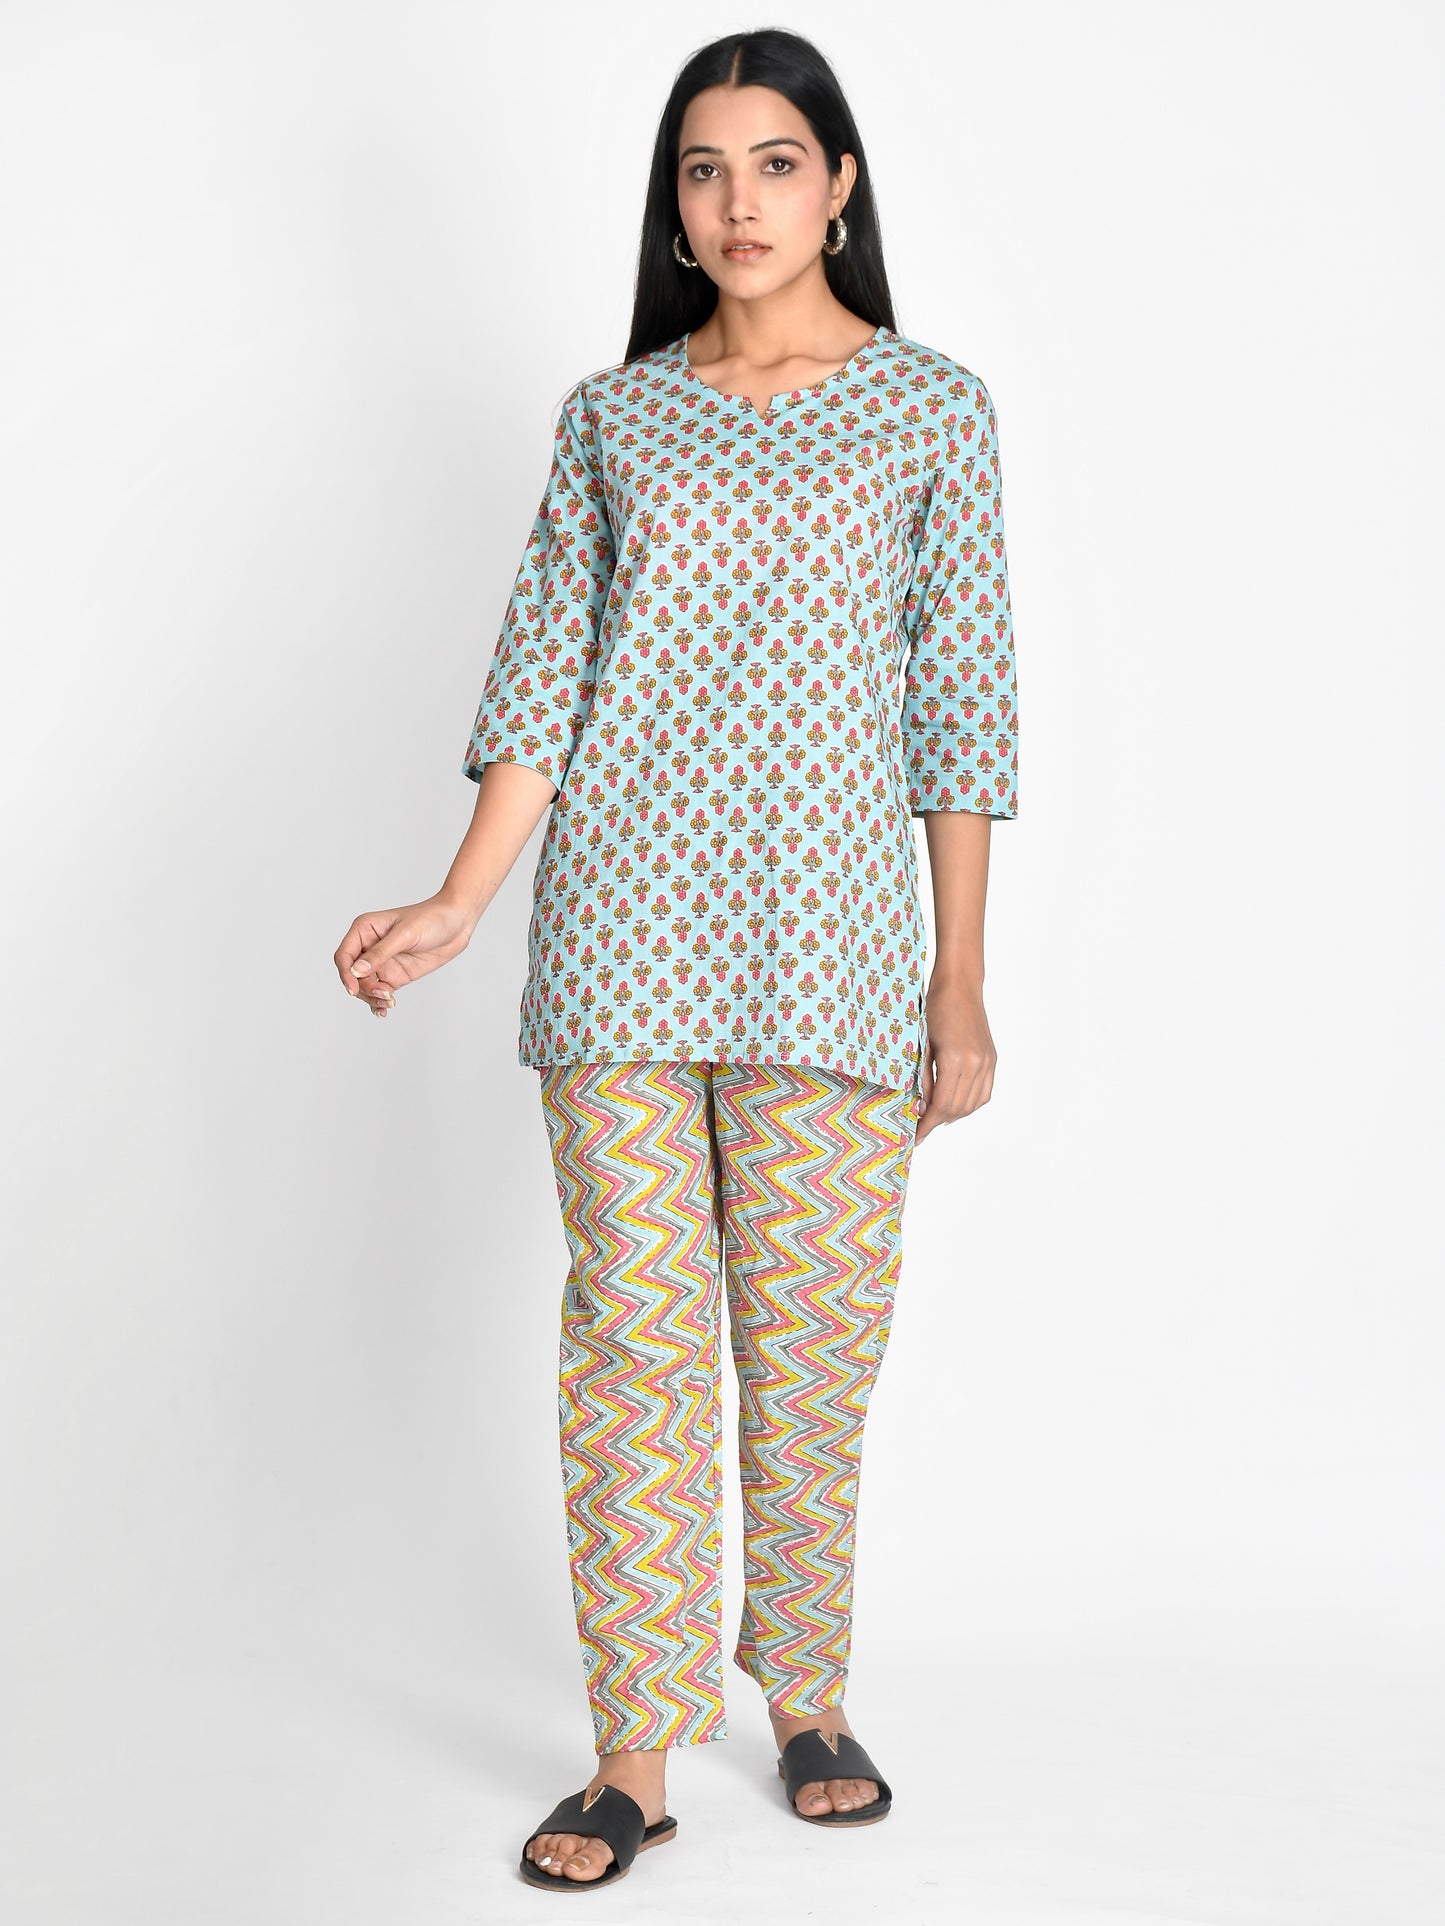 Shop this Pure Cotton Floral Printed Night Suit is designed for girls, made of soft and breathable cotton material. Perfect for a comfortable night's sleep, the floral print adds a touch of elegance. With this night suit, you can feel relaxed and stylish at the same time.